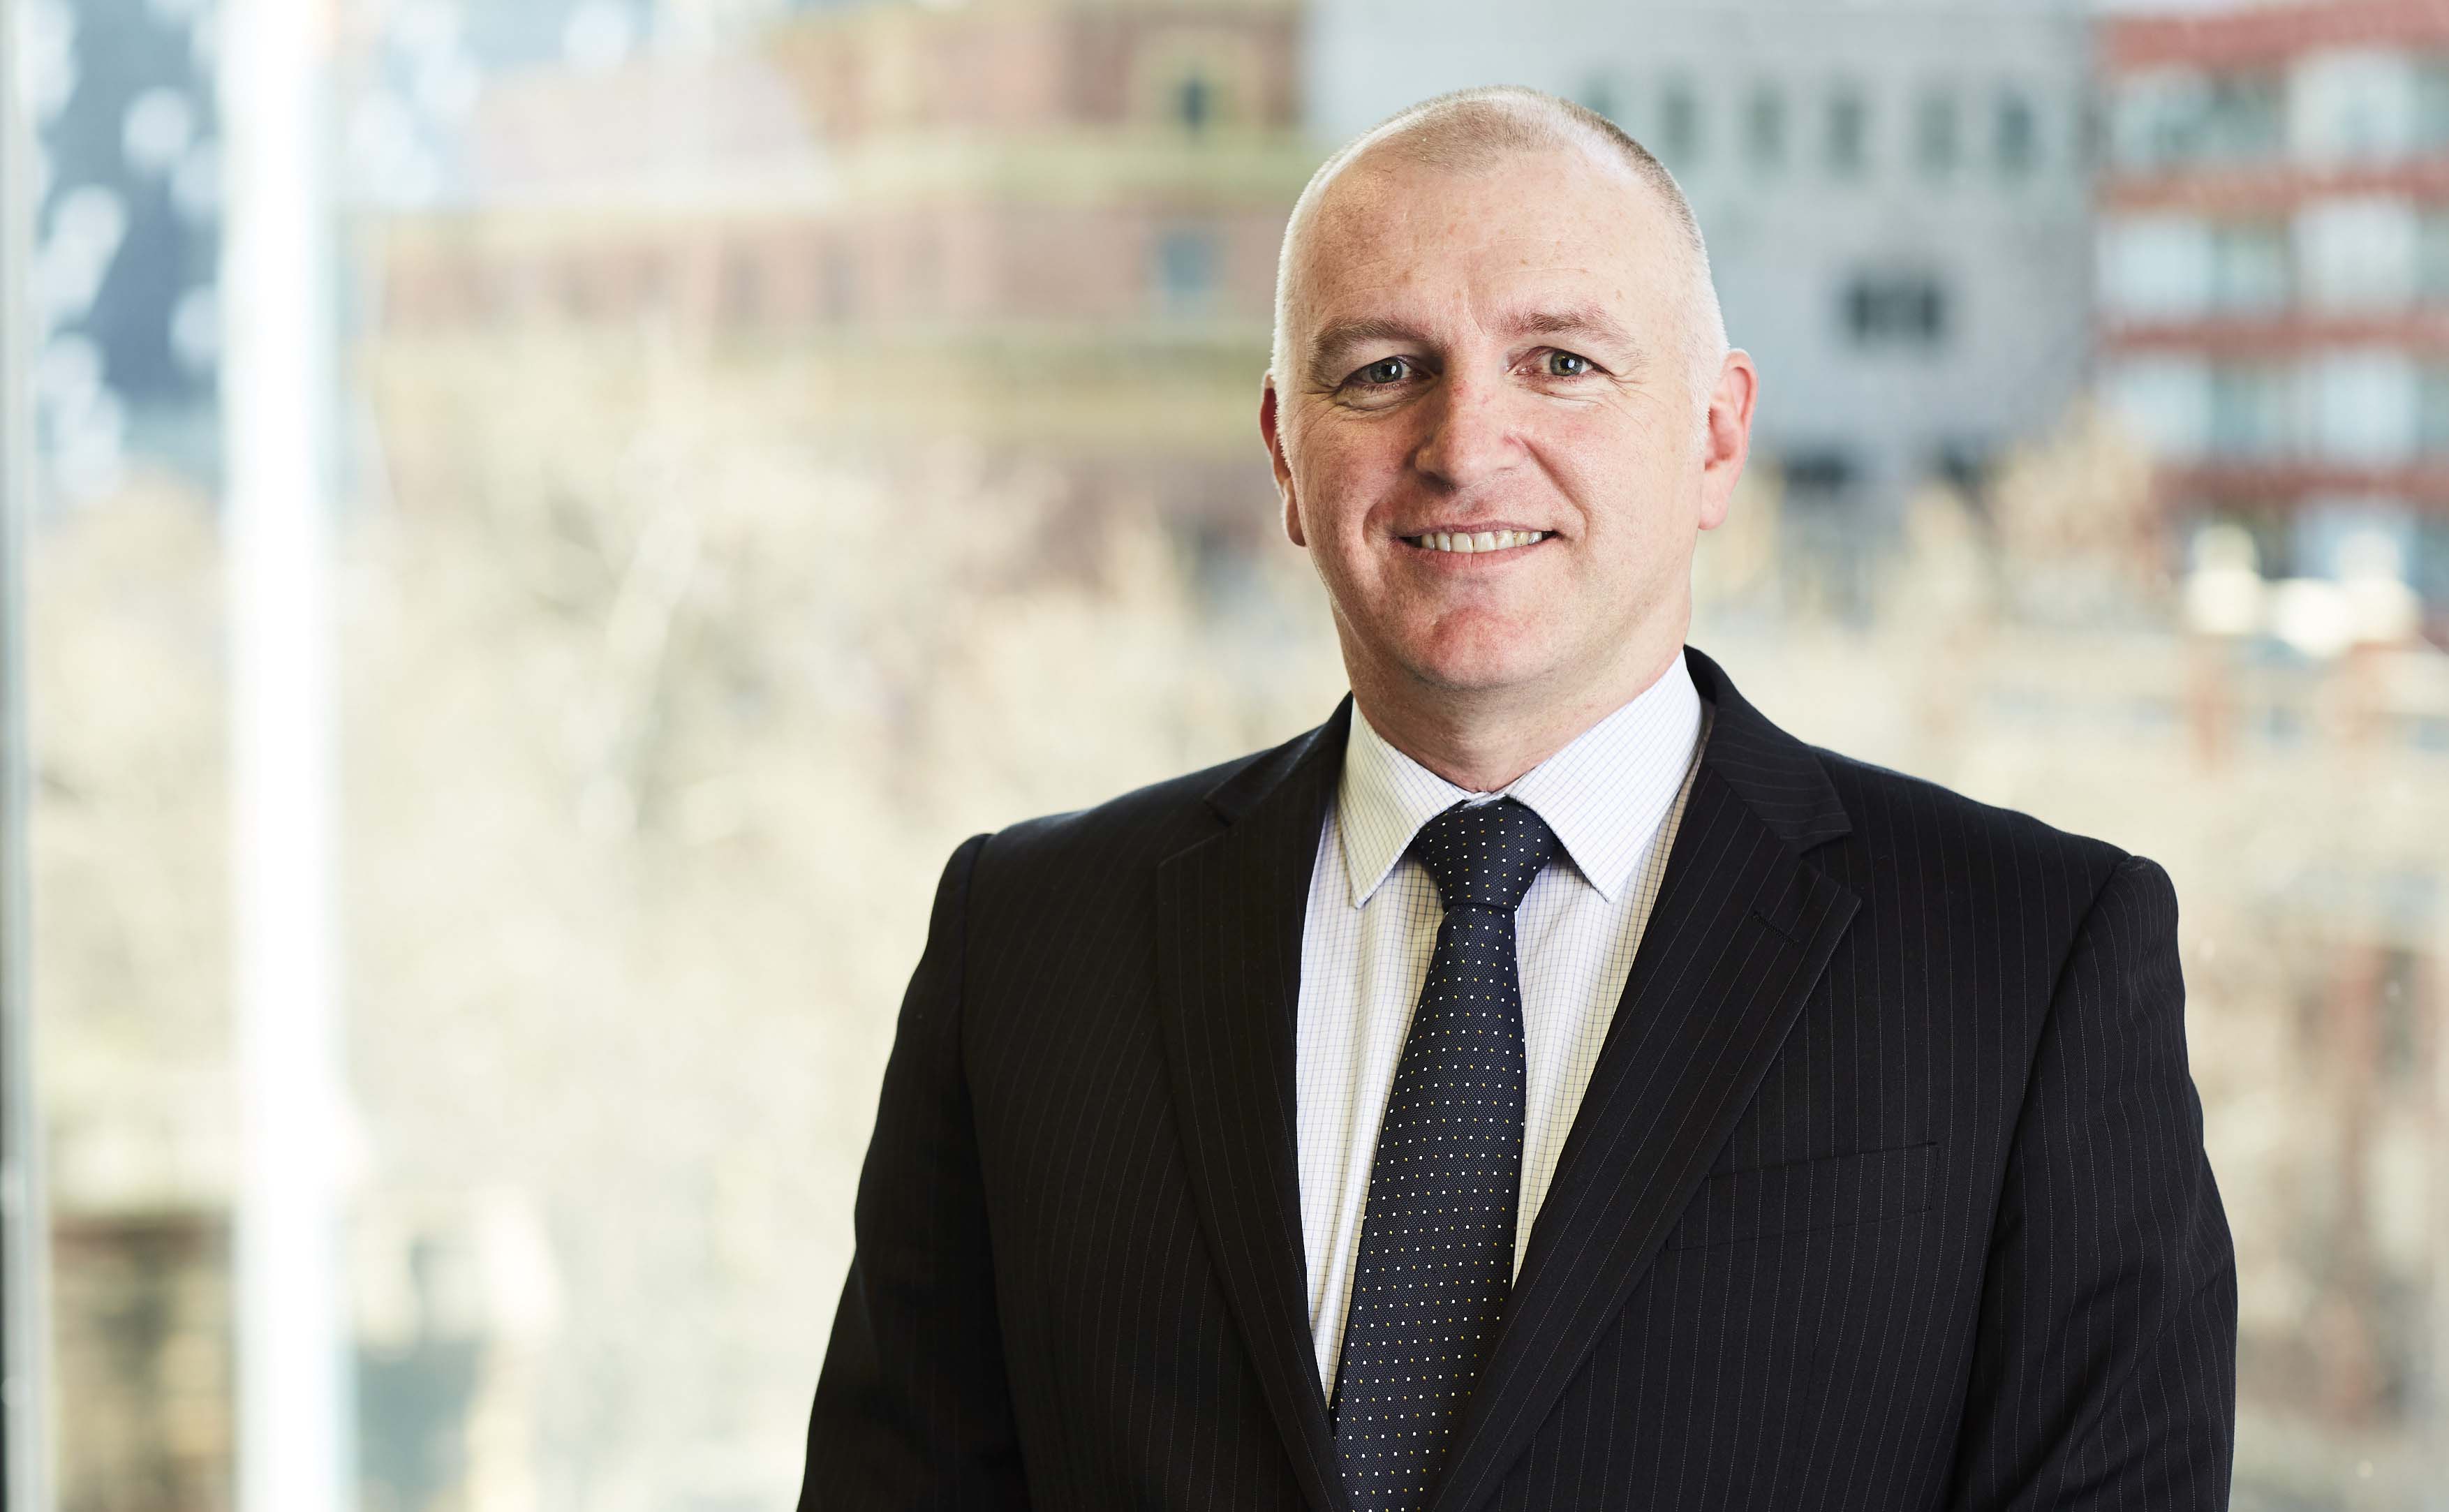 Image shows Public Transport Ombudsman, Simon McKenzie. Simon is a Caucasian man with closely cropped hair and he is smiling for the photo. He is wearing a black pinstripe suit jacket, white checked shirt and navy tie with white dots. The blurred background shows buildings and trees in the Melbourne CBD.